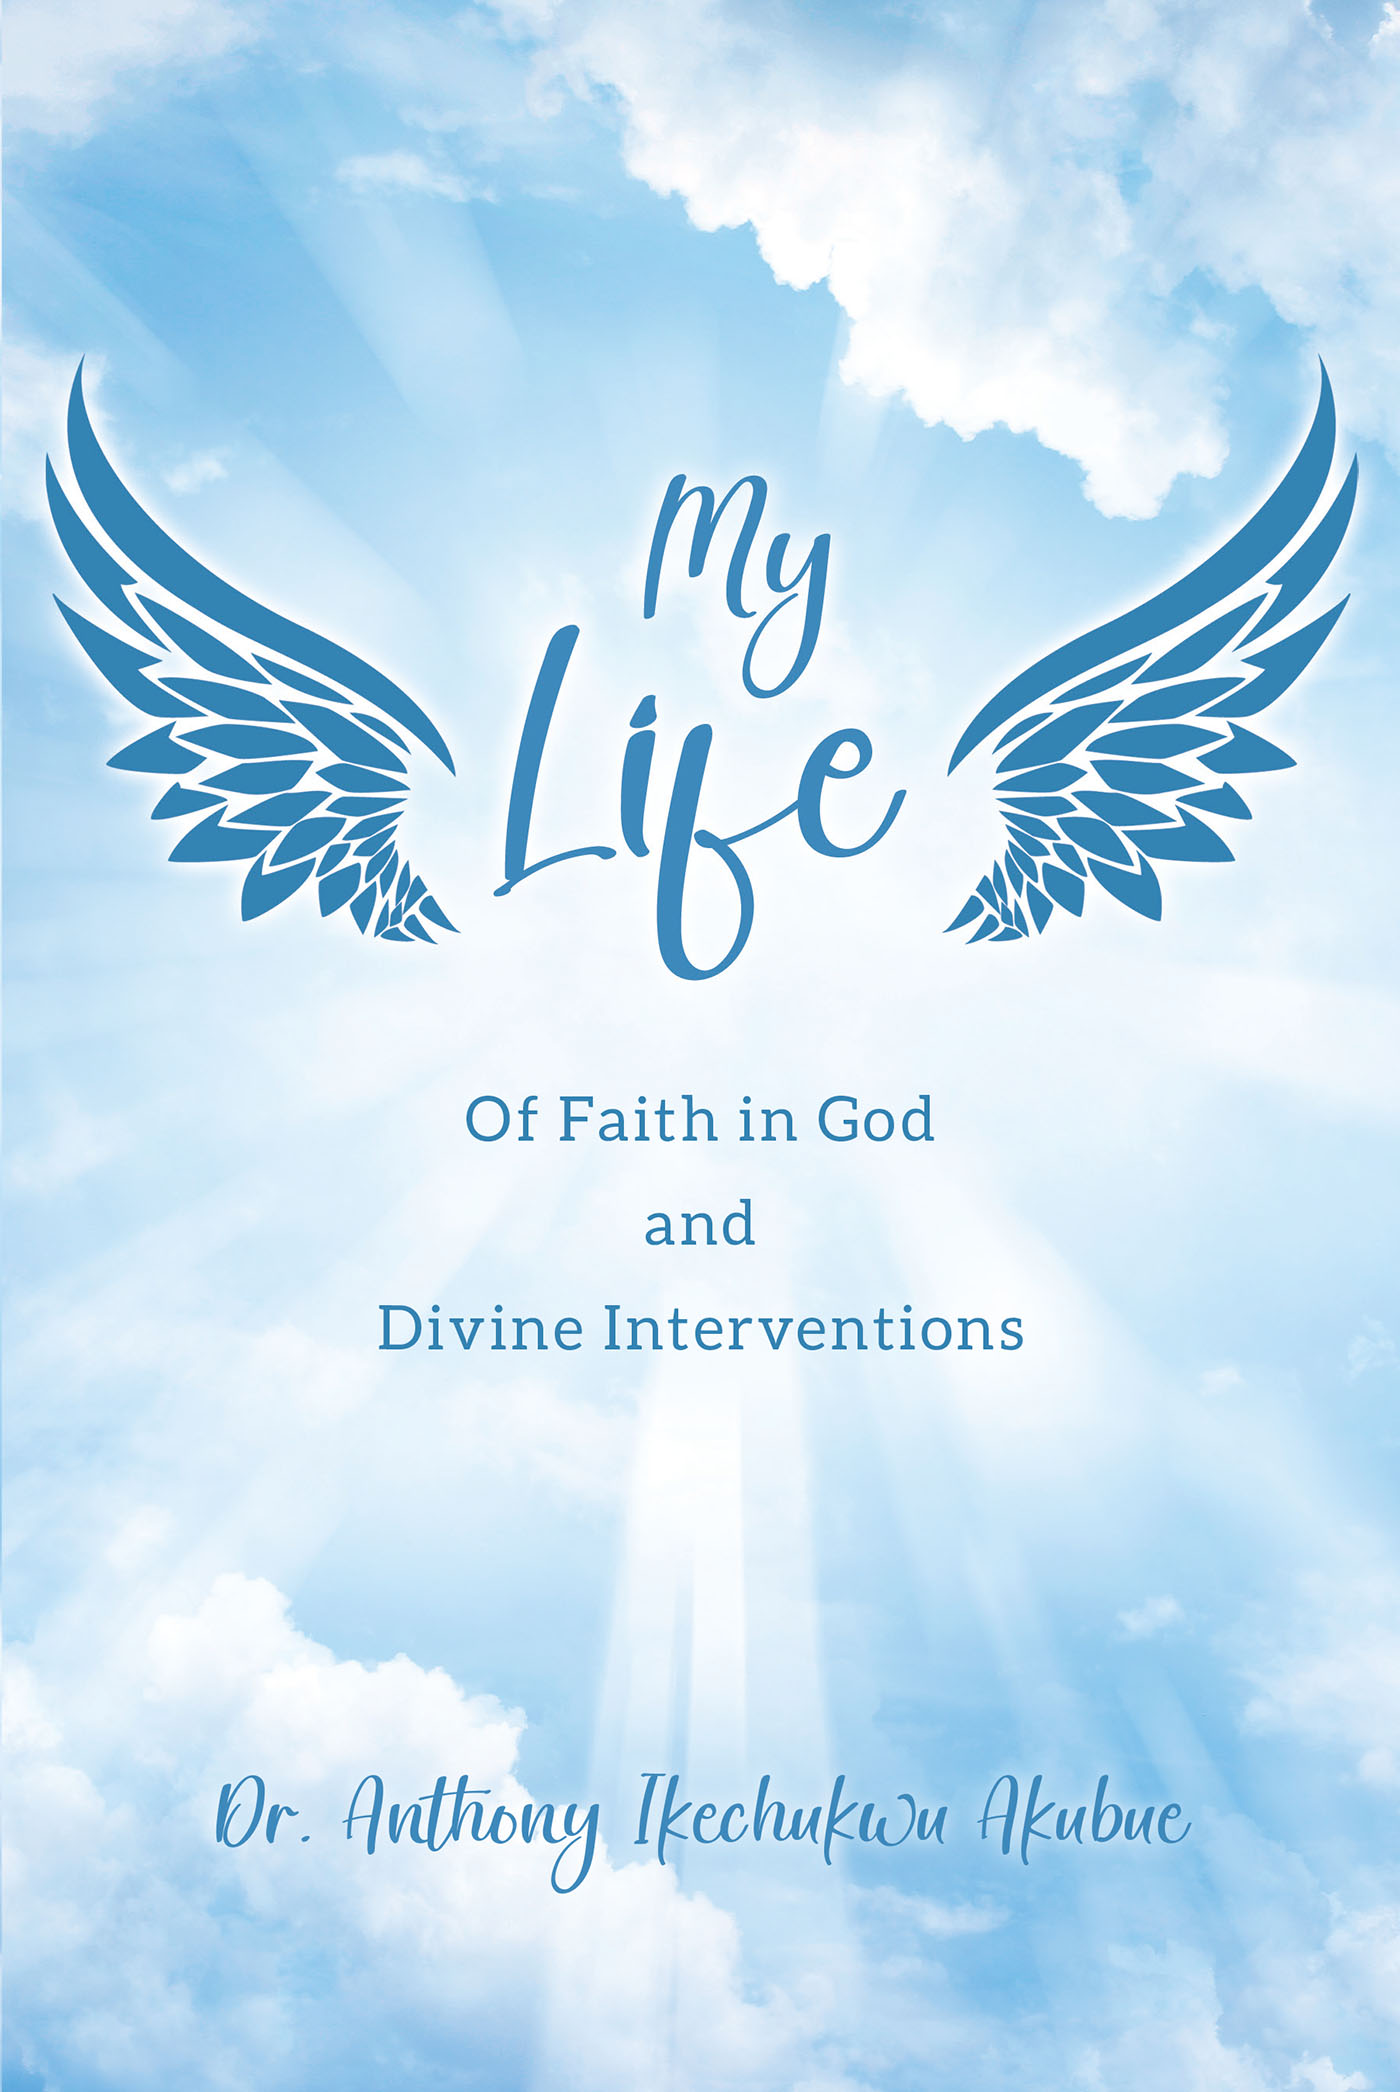 Author Dr. Anthony Ikechukwu Akubue’s New Book, “My Life: Of Faith in God and Divine Interventions,” Explores How the Author’s Life Has Been Influenced by the Lord